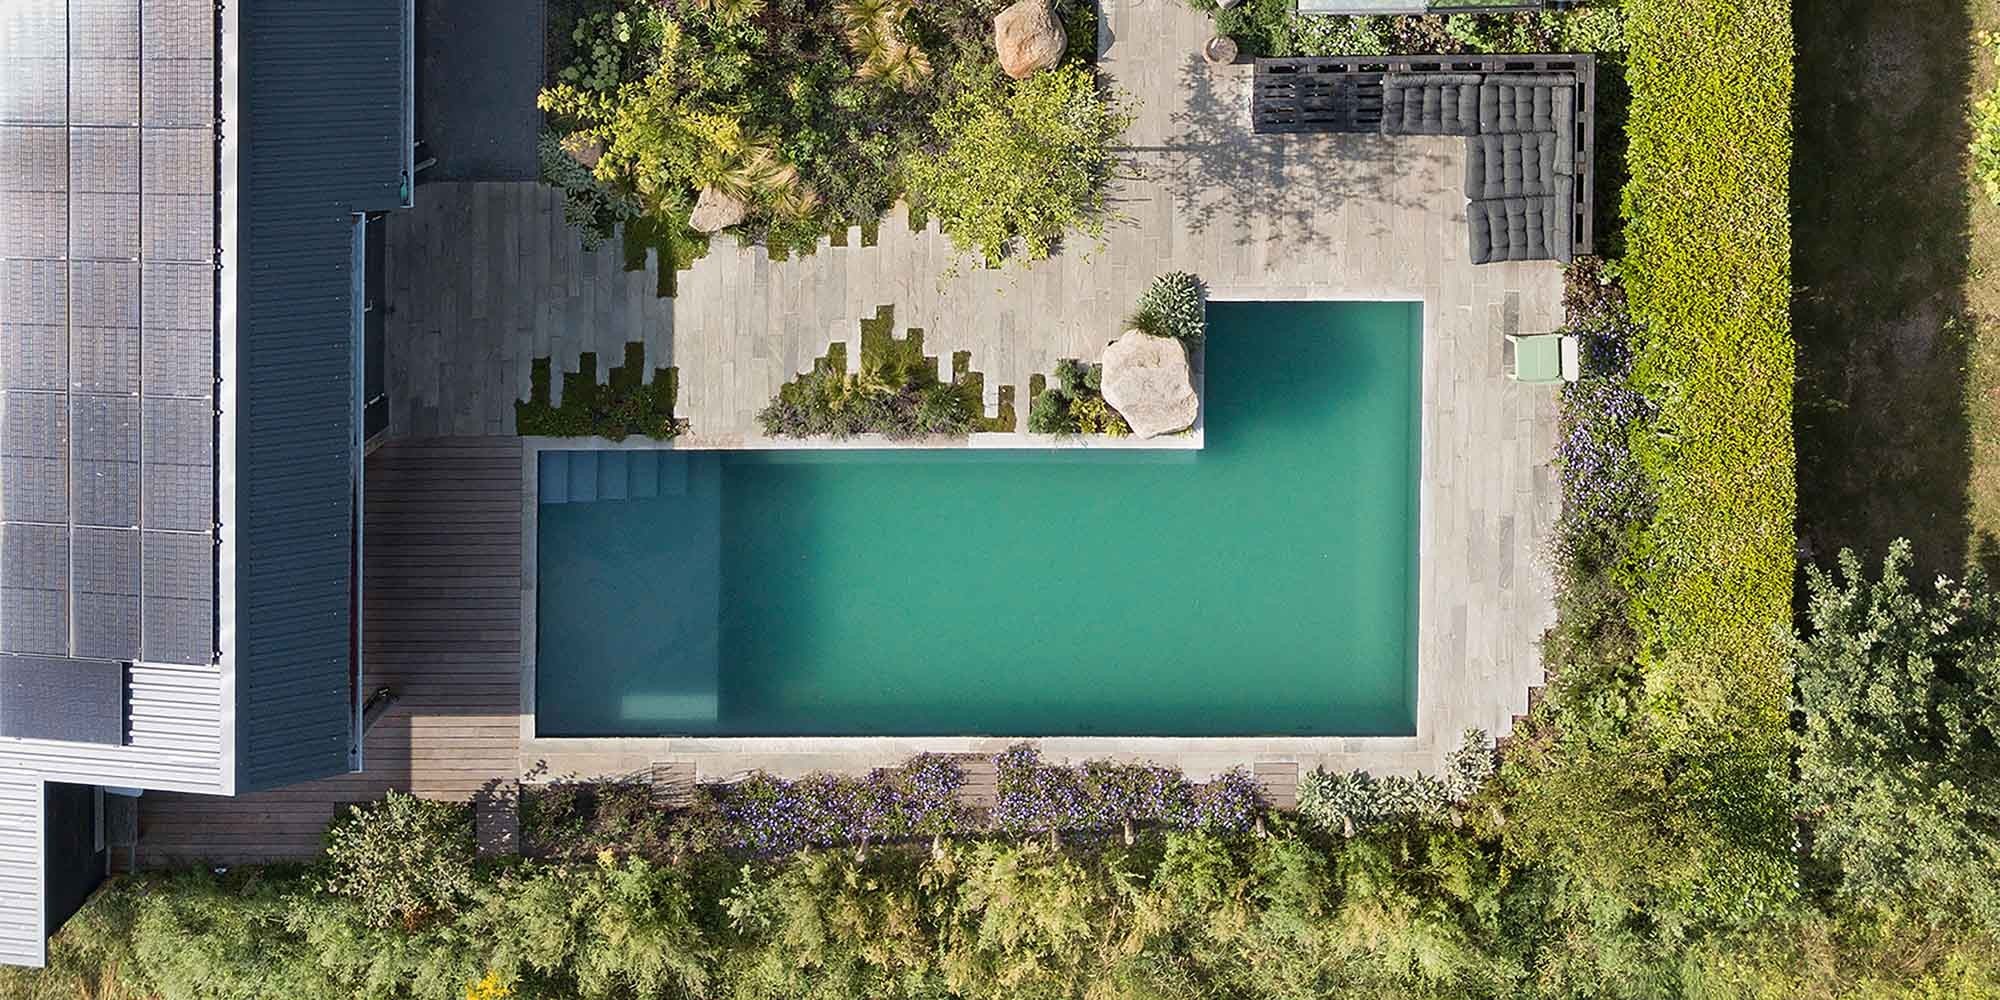 A pool in the Netherlands in the garden photographed from above